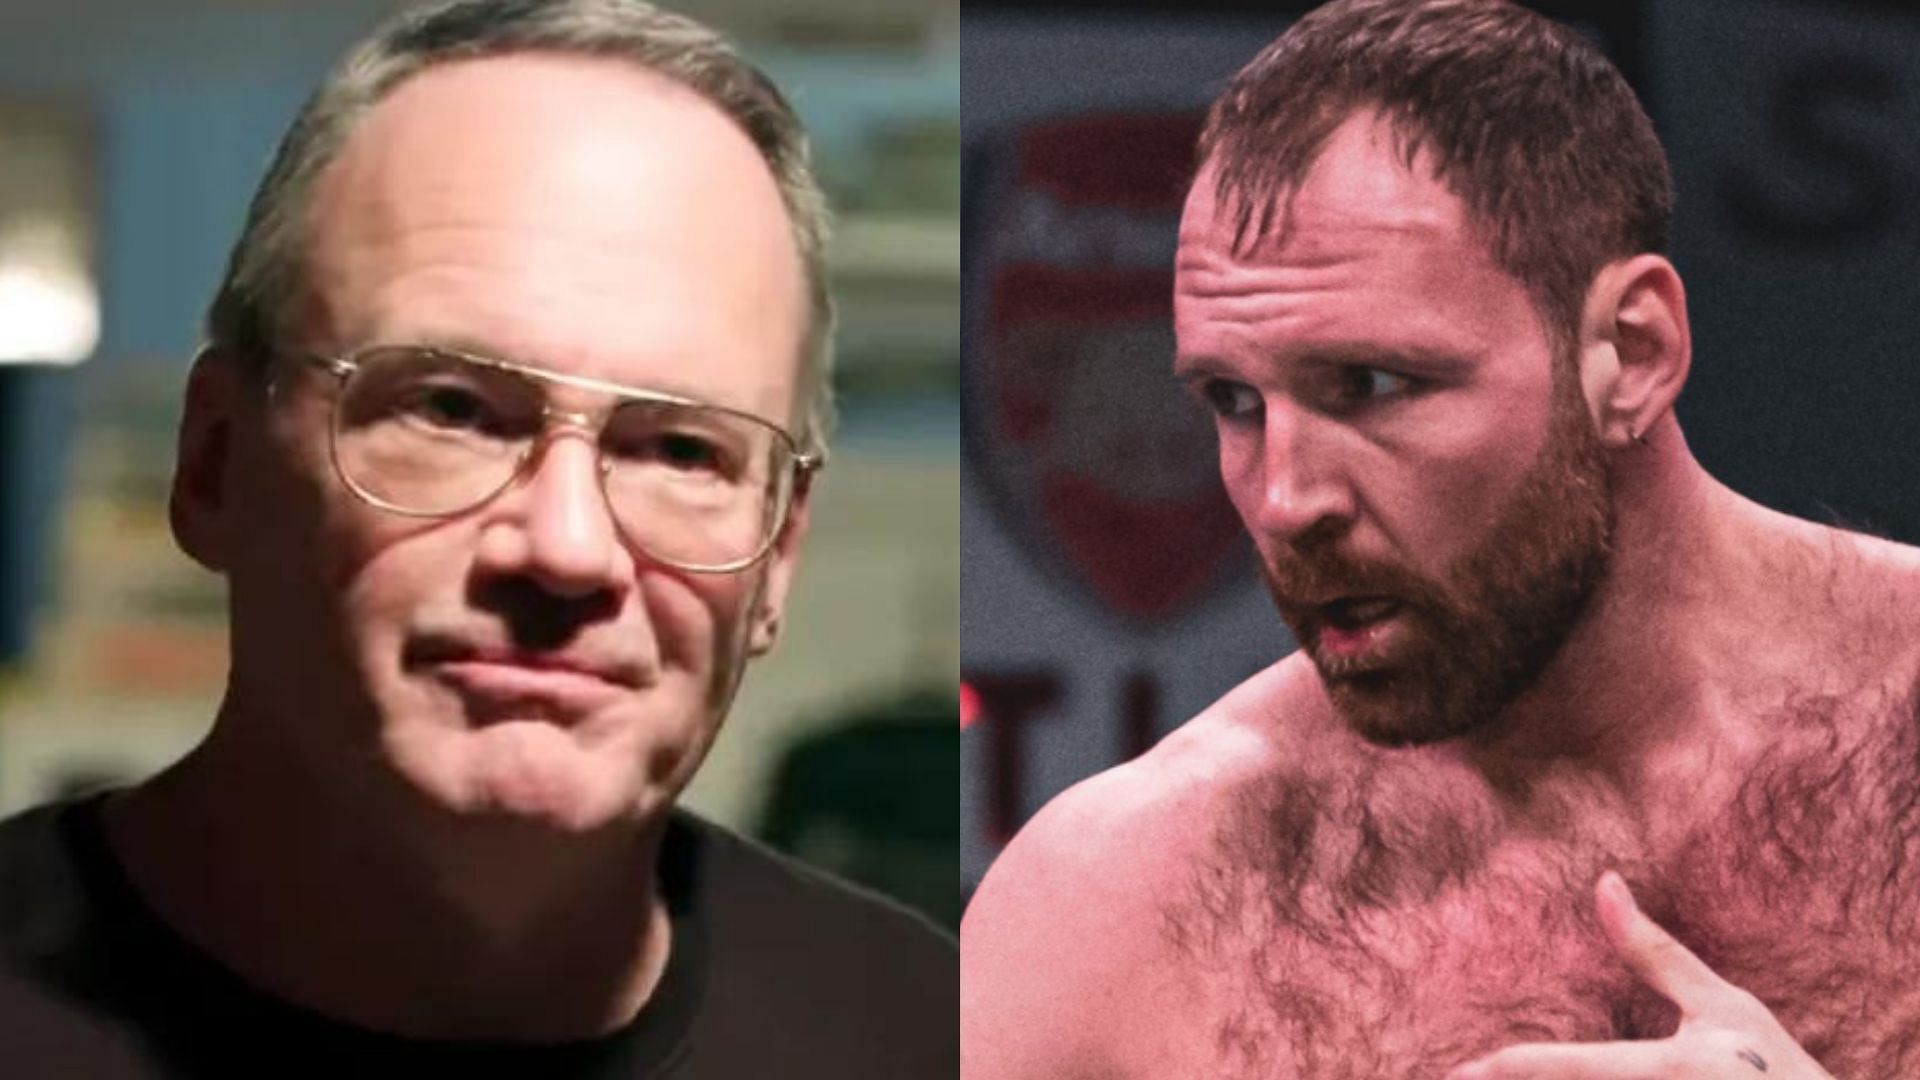 Jim Cornette has commented on Jon Moxley